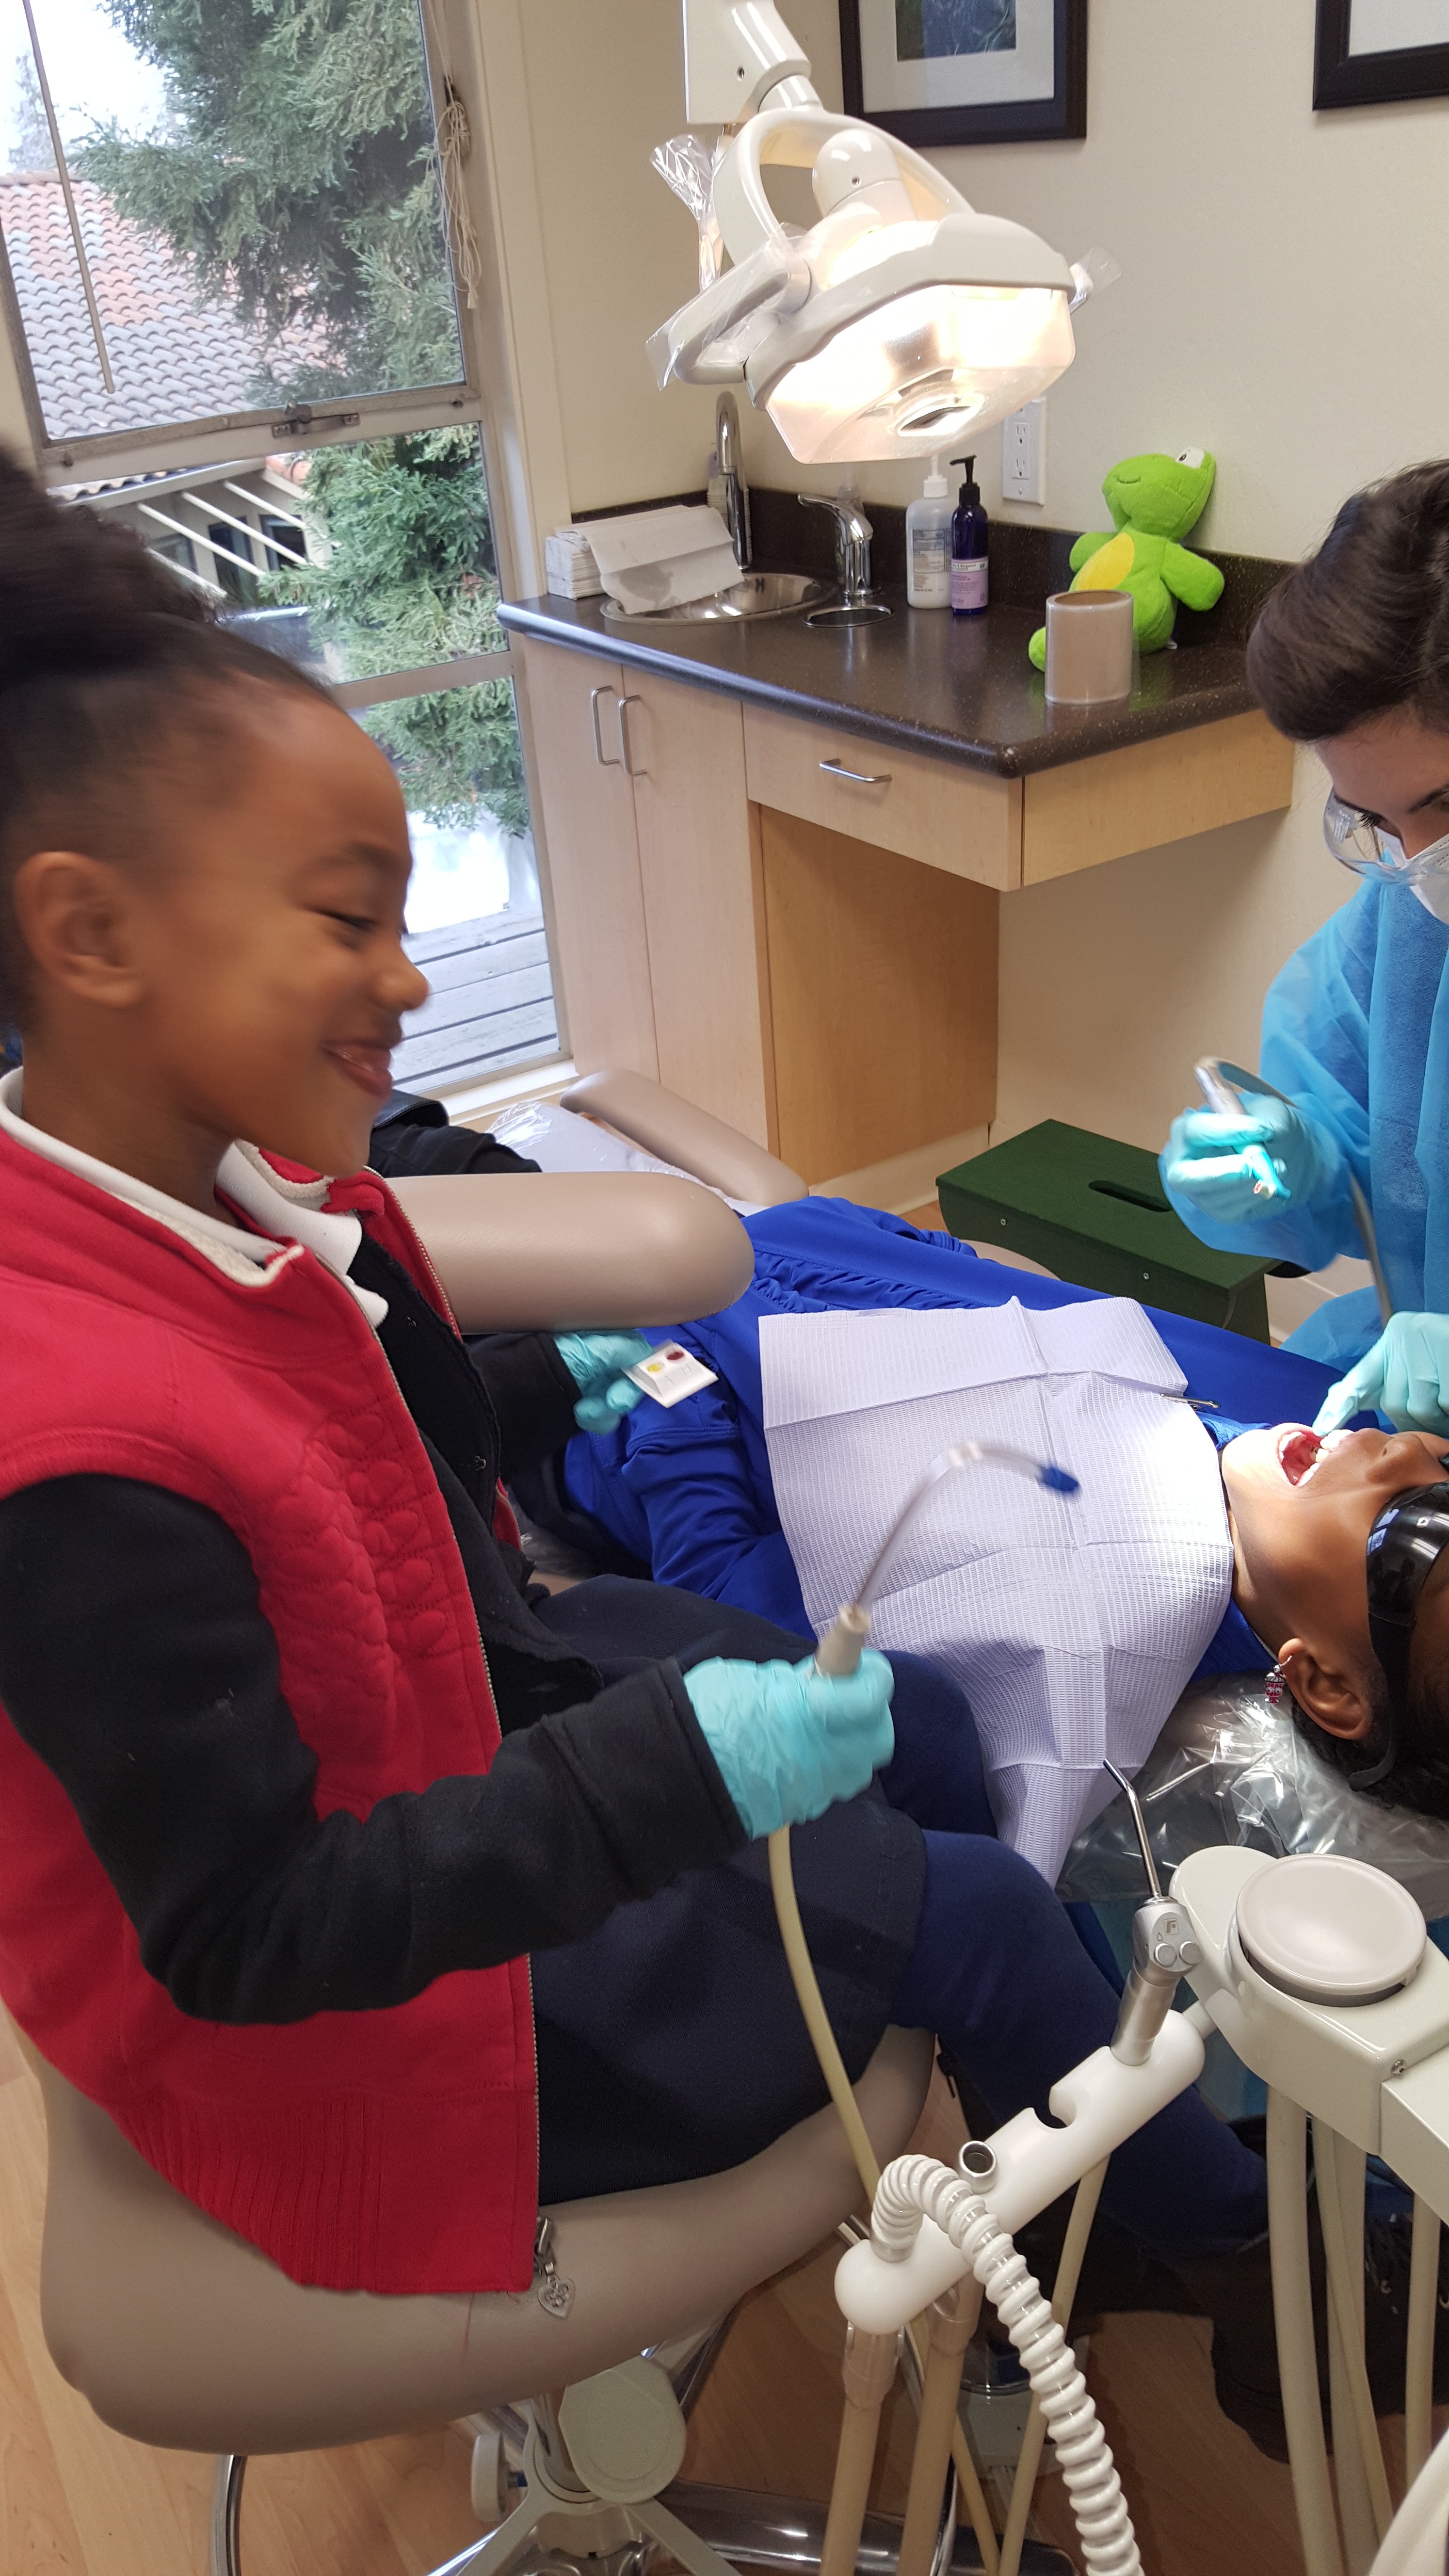 Aspiring dentist helping with sister's appointment